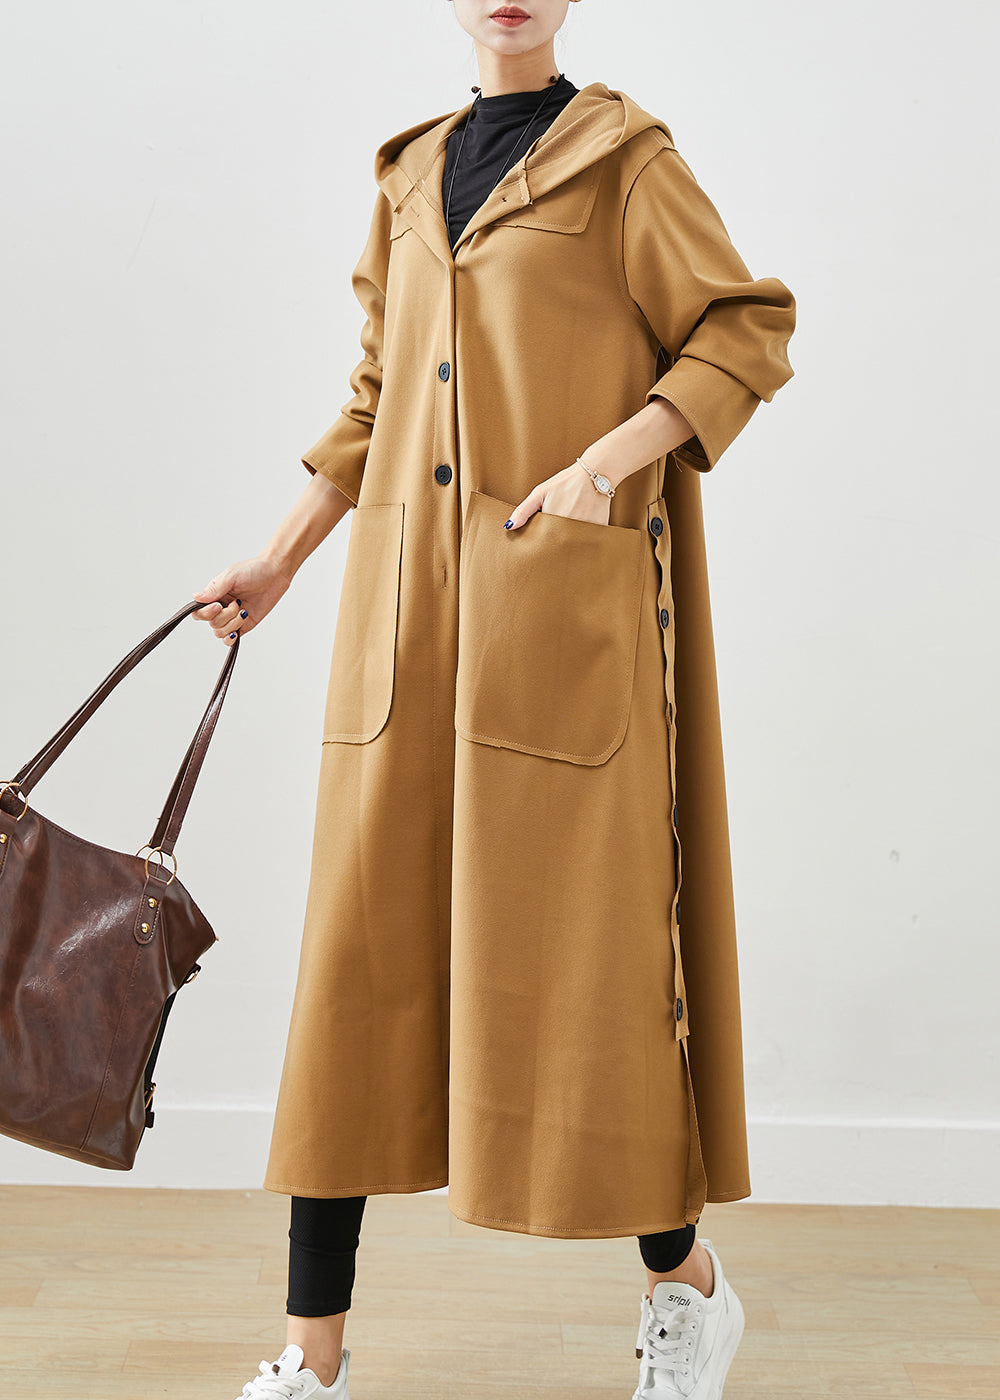 Plus Size Khaki Hooded Pockets Cotton Trench Fall